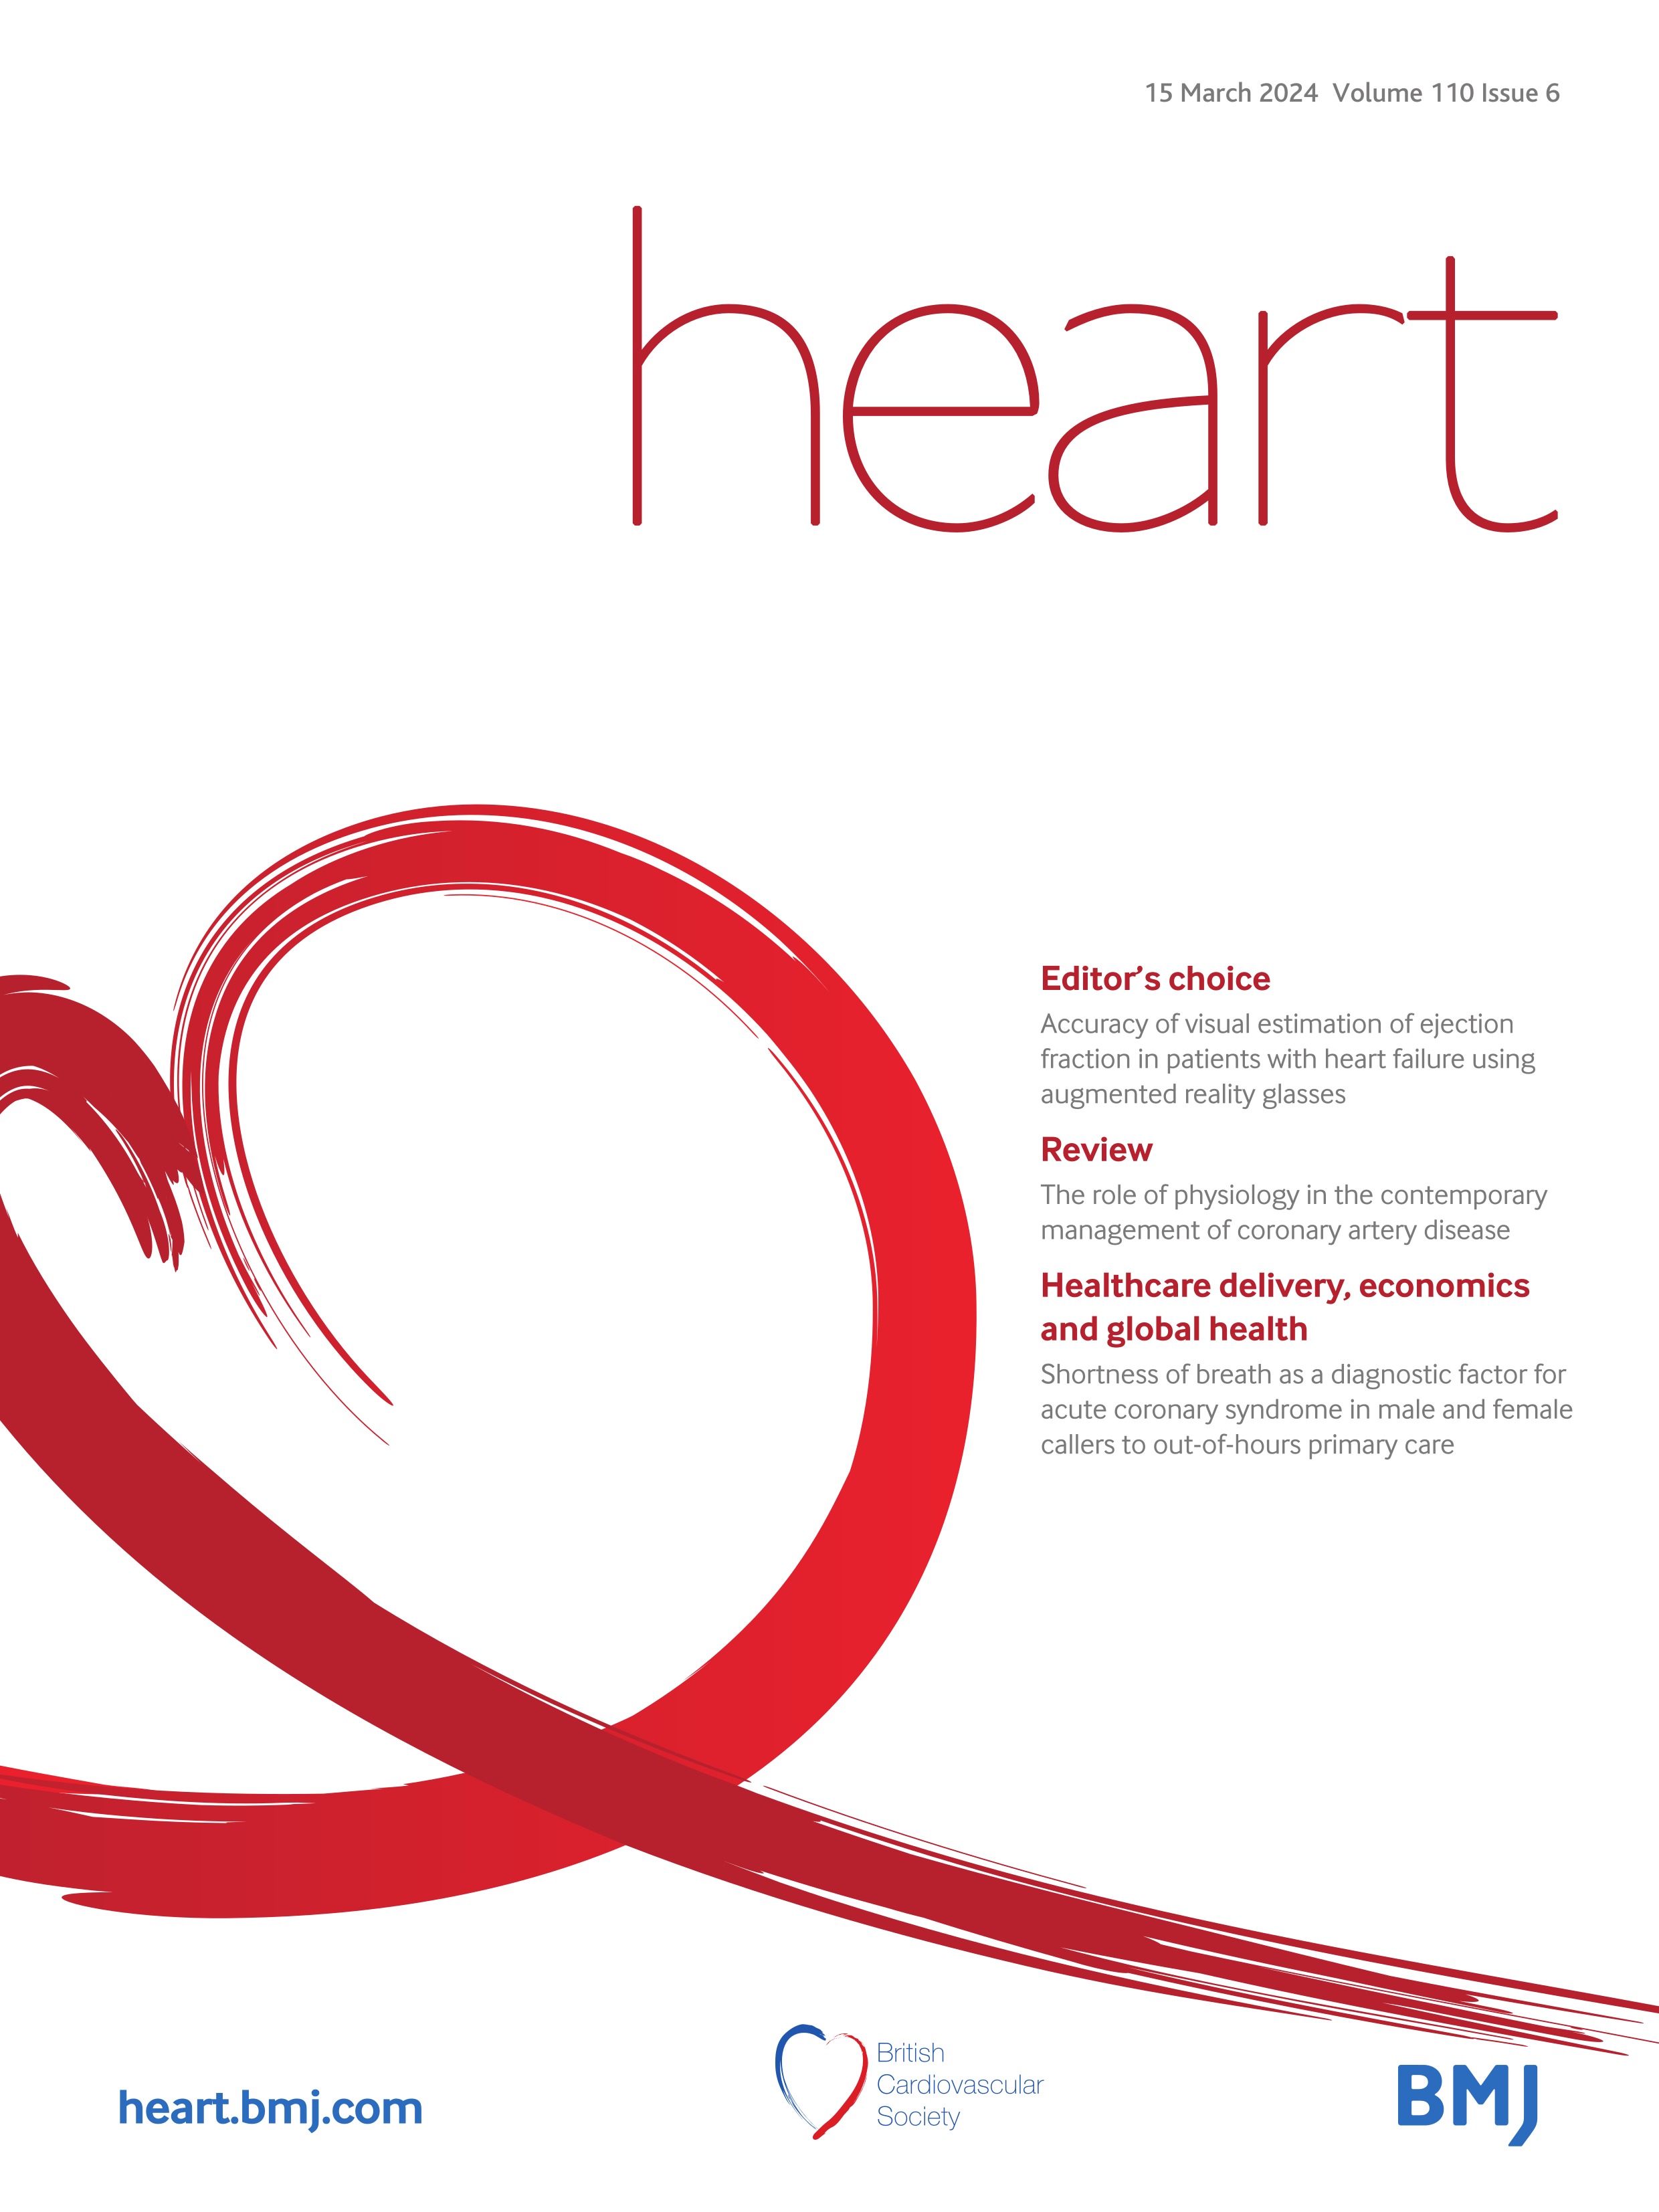 Prehospital triage in suspected myocardial infarction: a calculated risk?